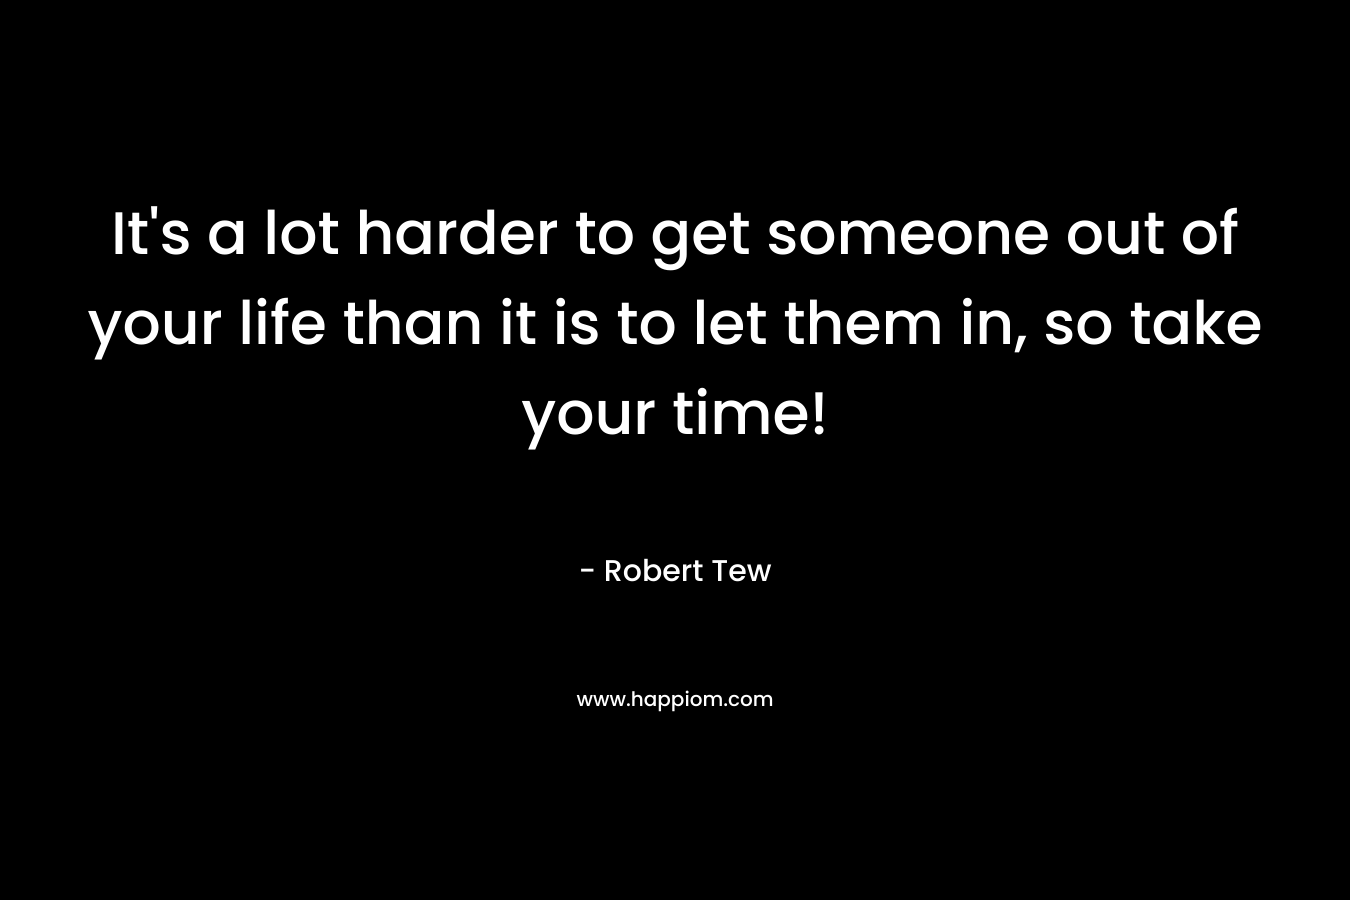 It's a lot harder to get someone out of your life than it is to let them in, so take your time!